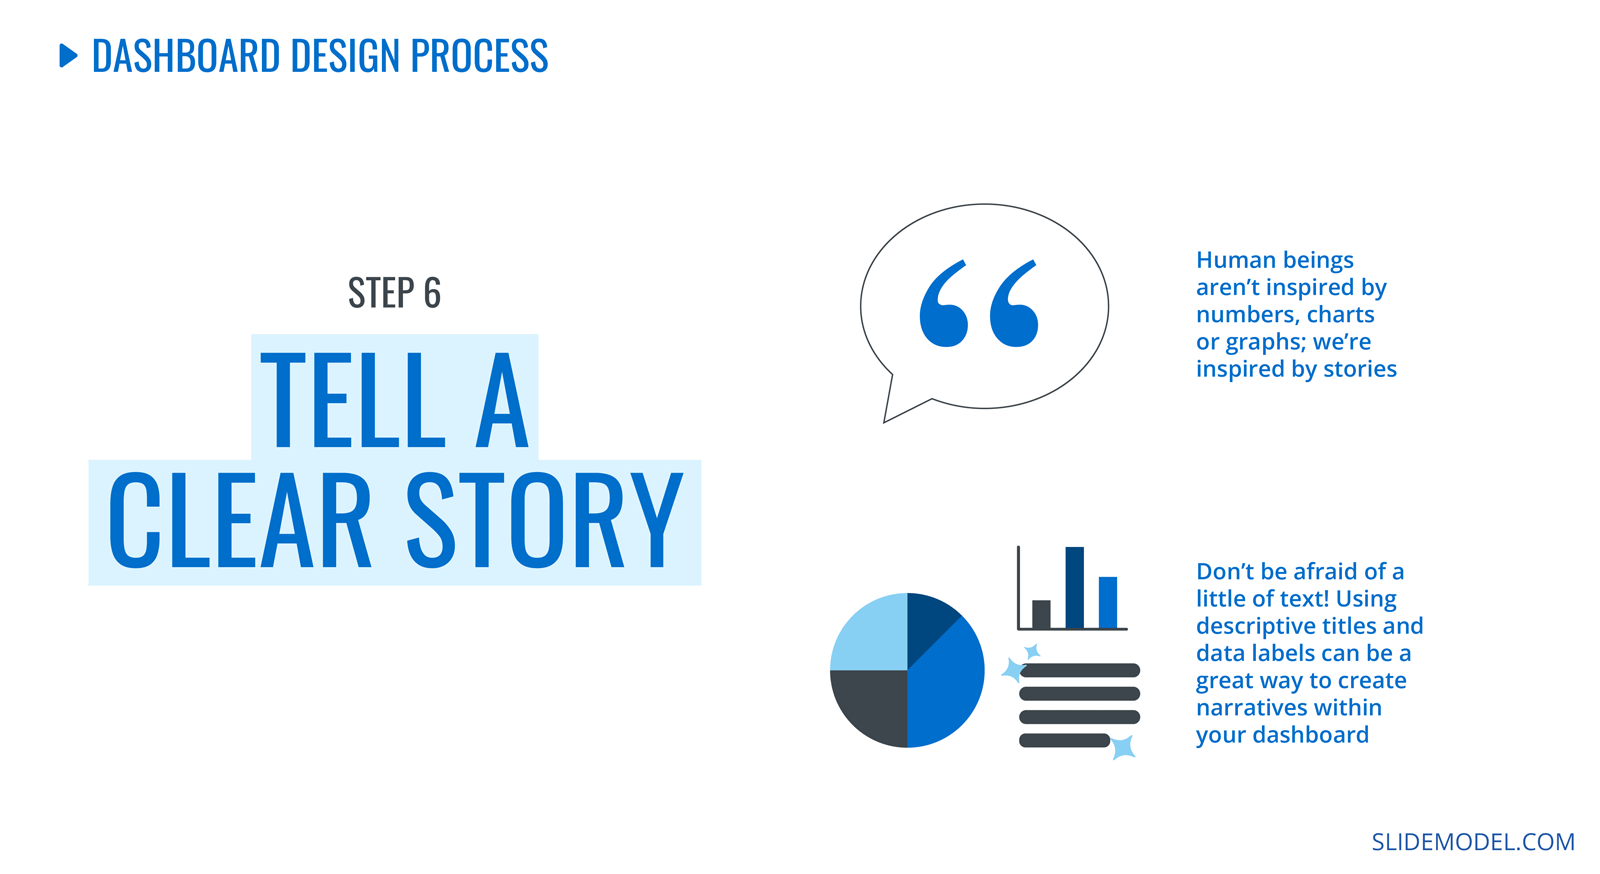 Dashboard Design Process. Step 6: Tell a clear story